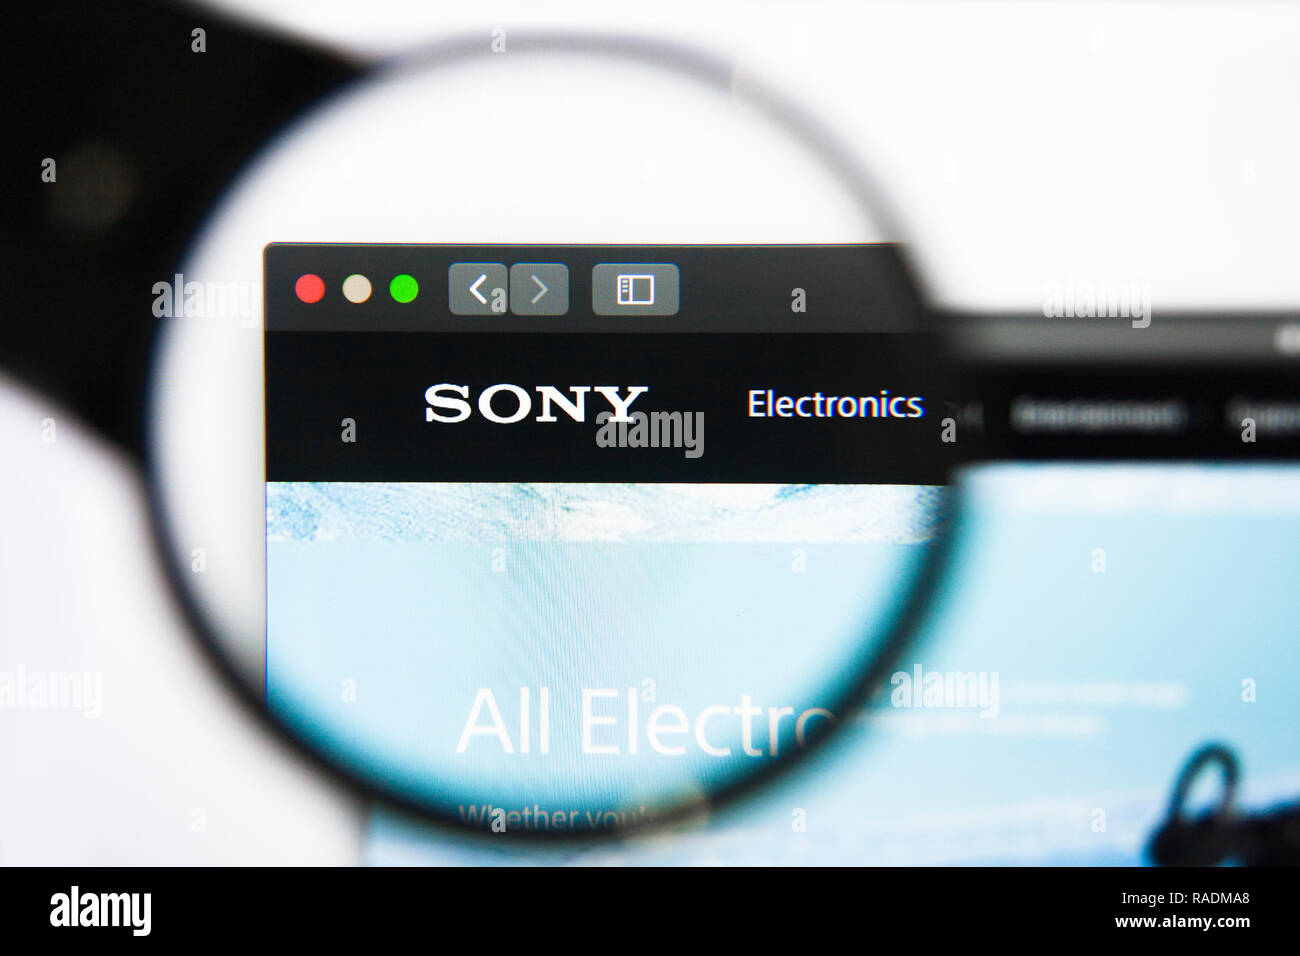 Los Angeles, California, USA - 27 December 2018: SONY website homepage. SONY logo visible on screen Stock Photo